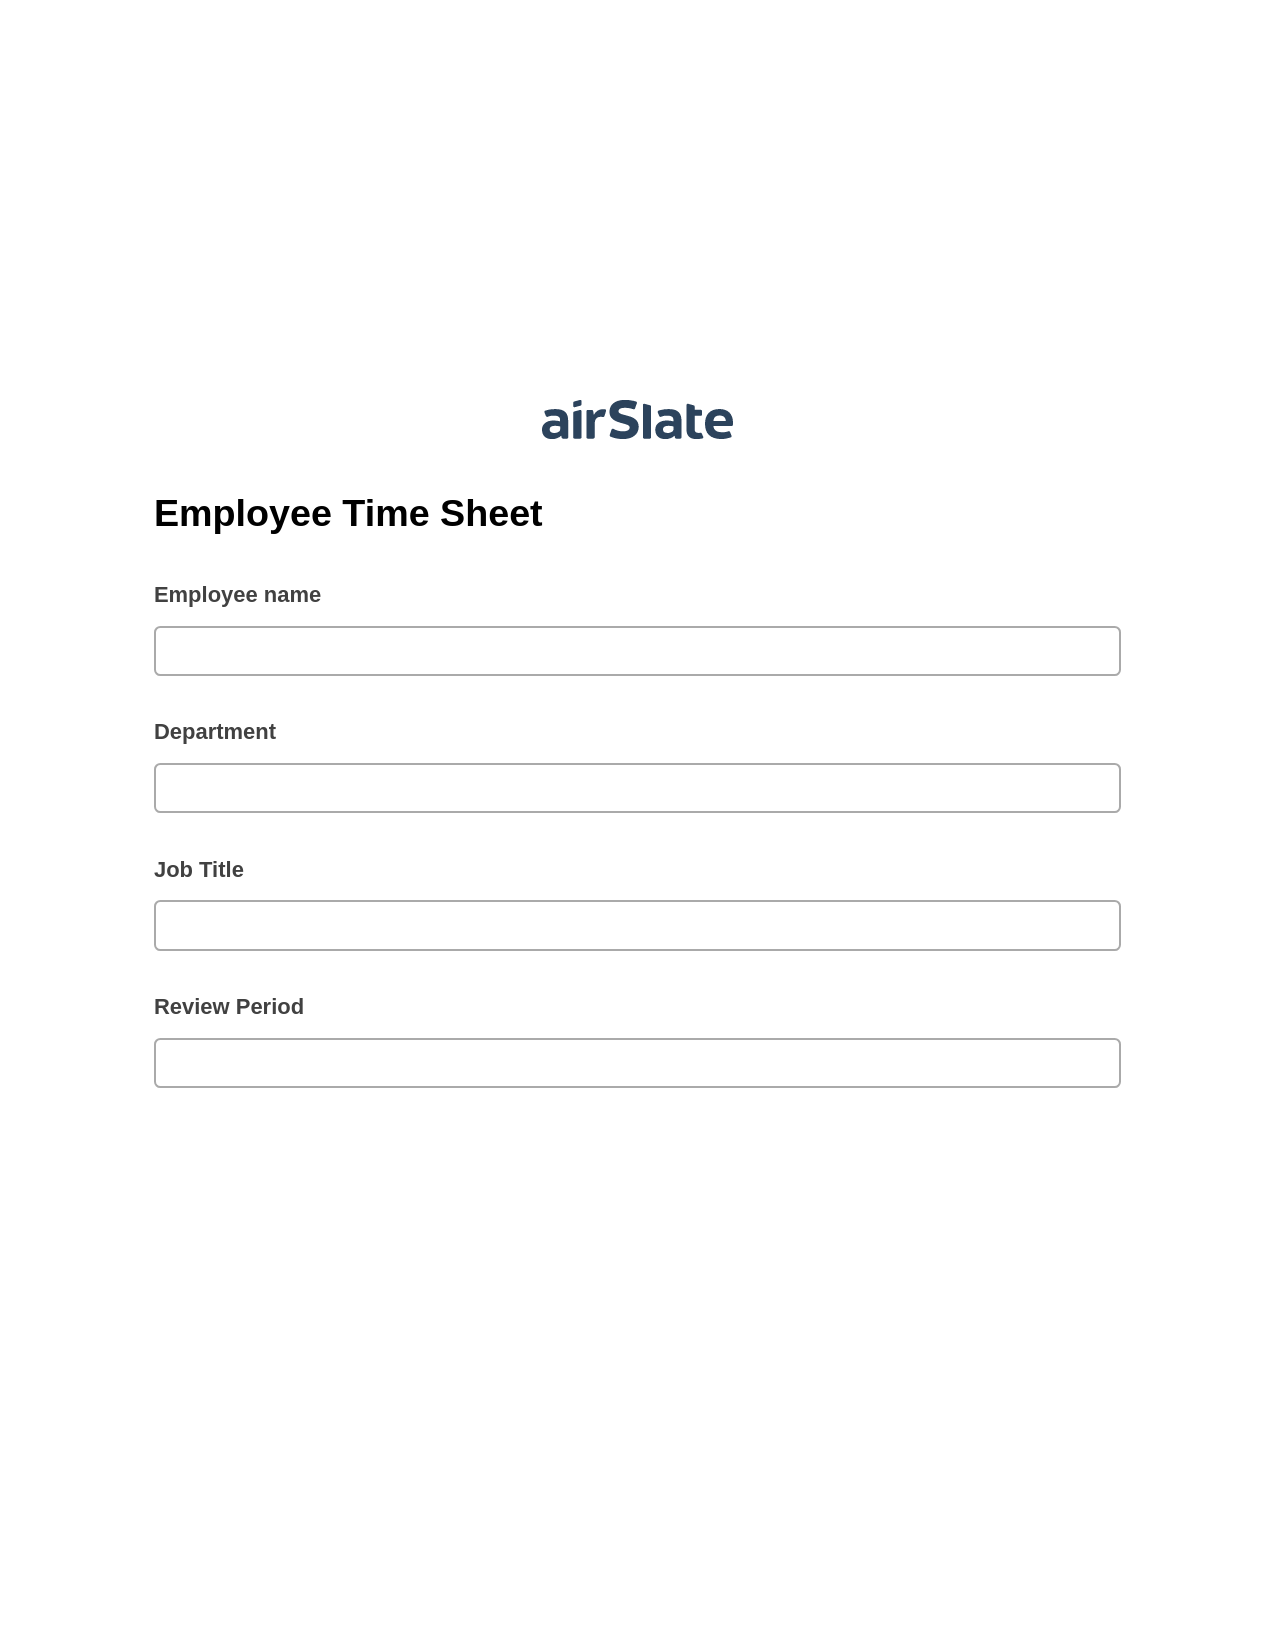 Employee Time Sheet Pre-fill from Excel Spreadsheet Bot, Send a Slate to Salesforce Contact Bot, Export to Excel 365 Bot